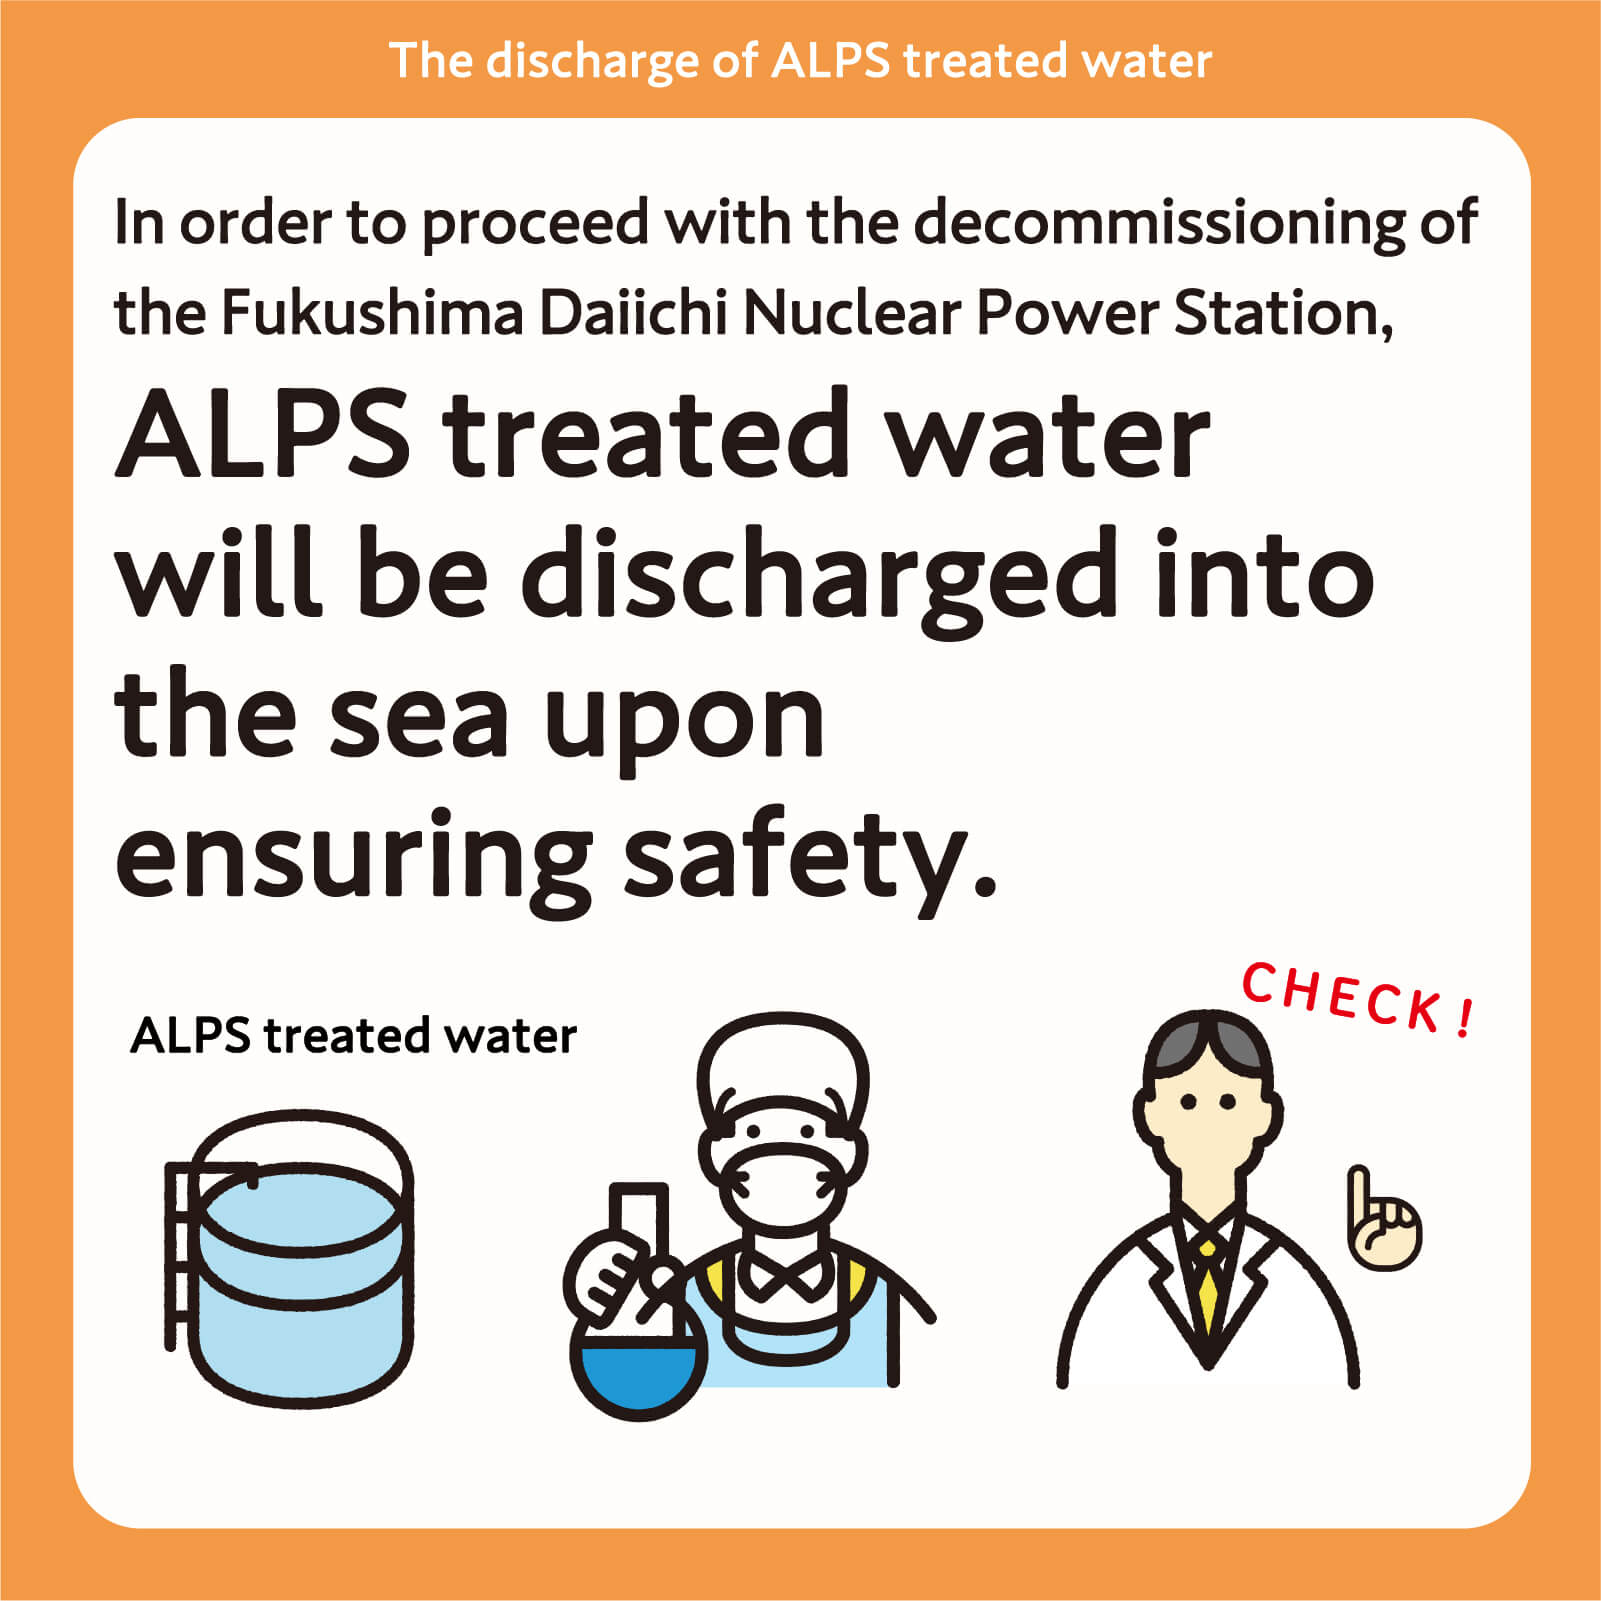 In order to proceed with the decommissioning of the Fukushima Daiichi Nuclear Power Station, ALPS treated water will be discharged into the sea upon ensuring safety.